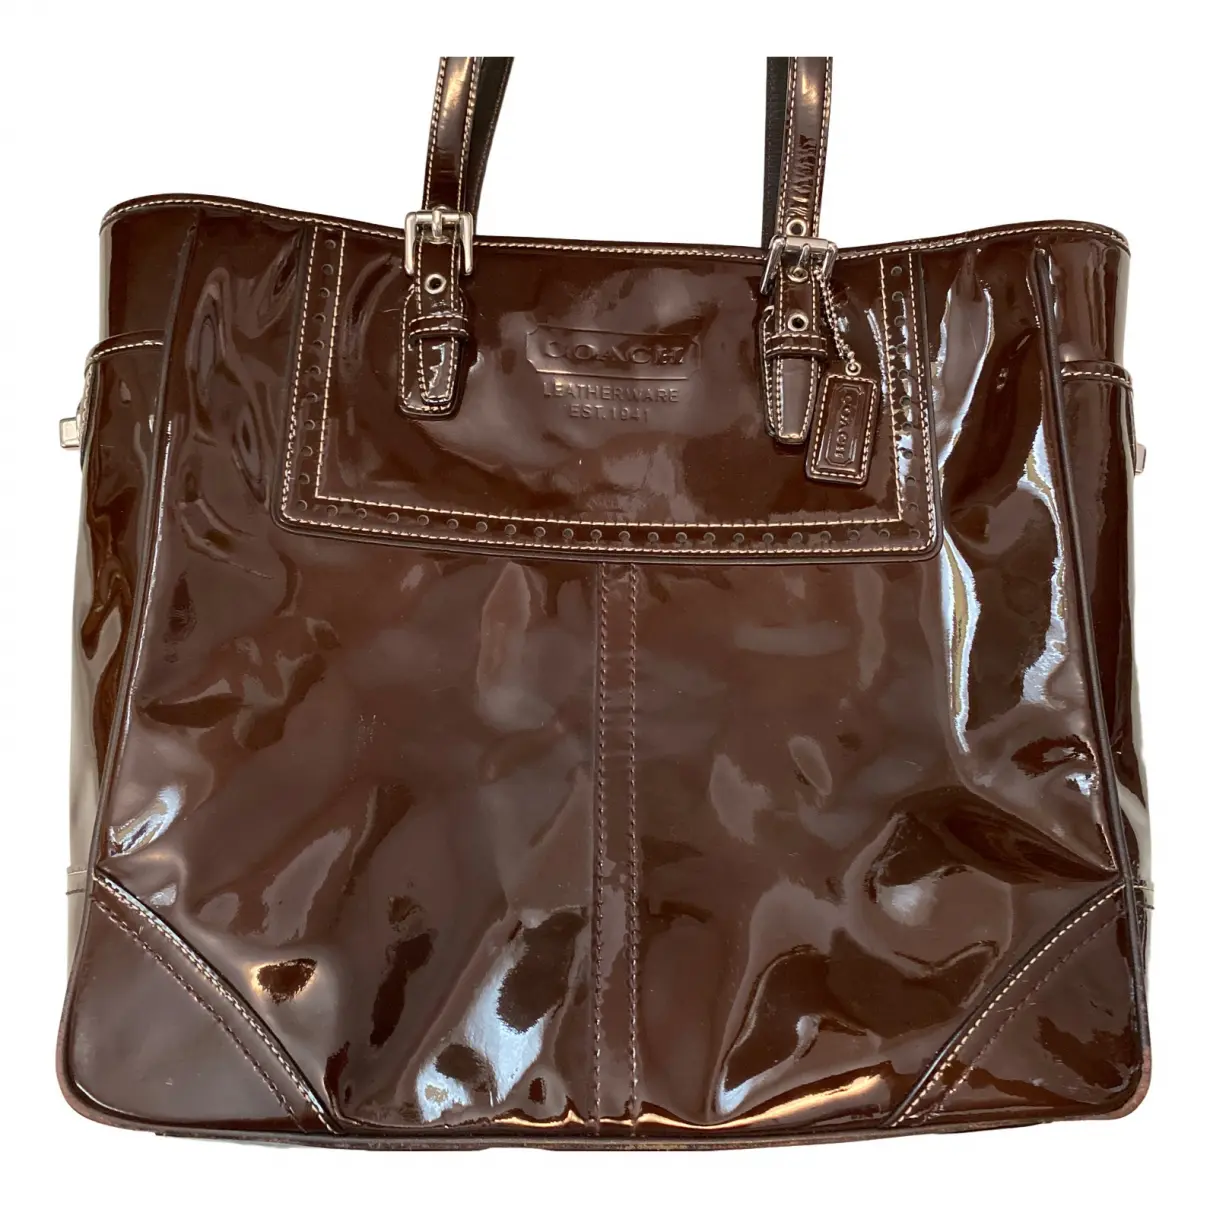 Patent leather tote Coach